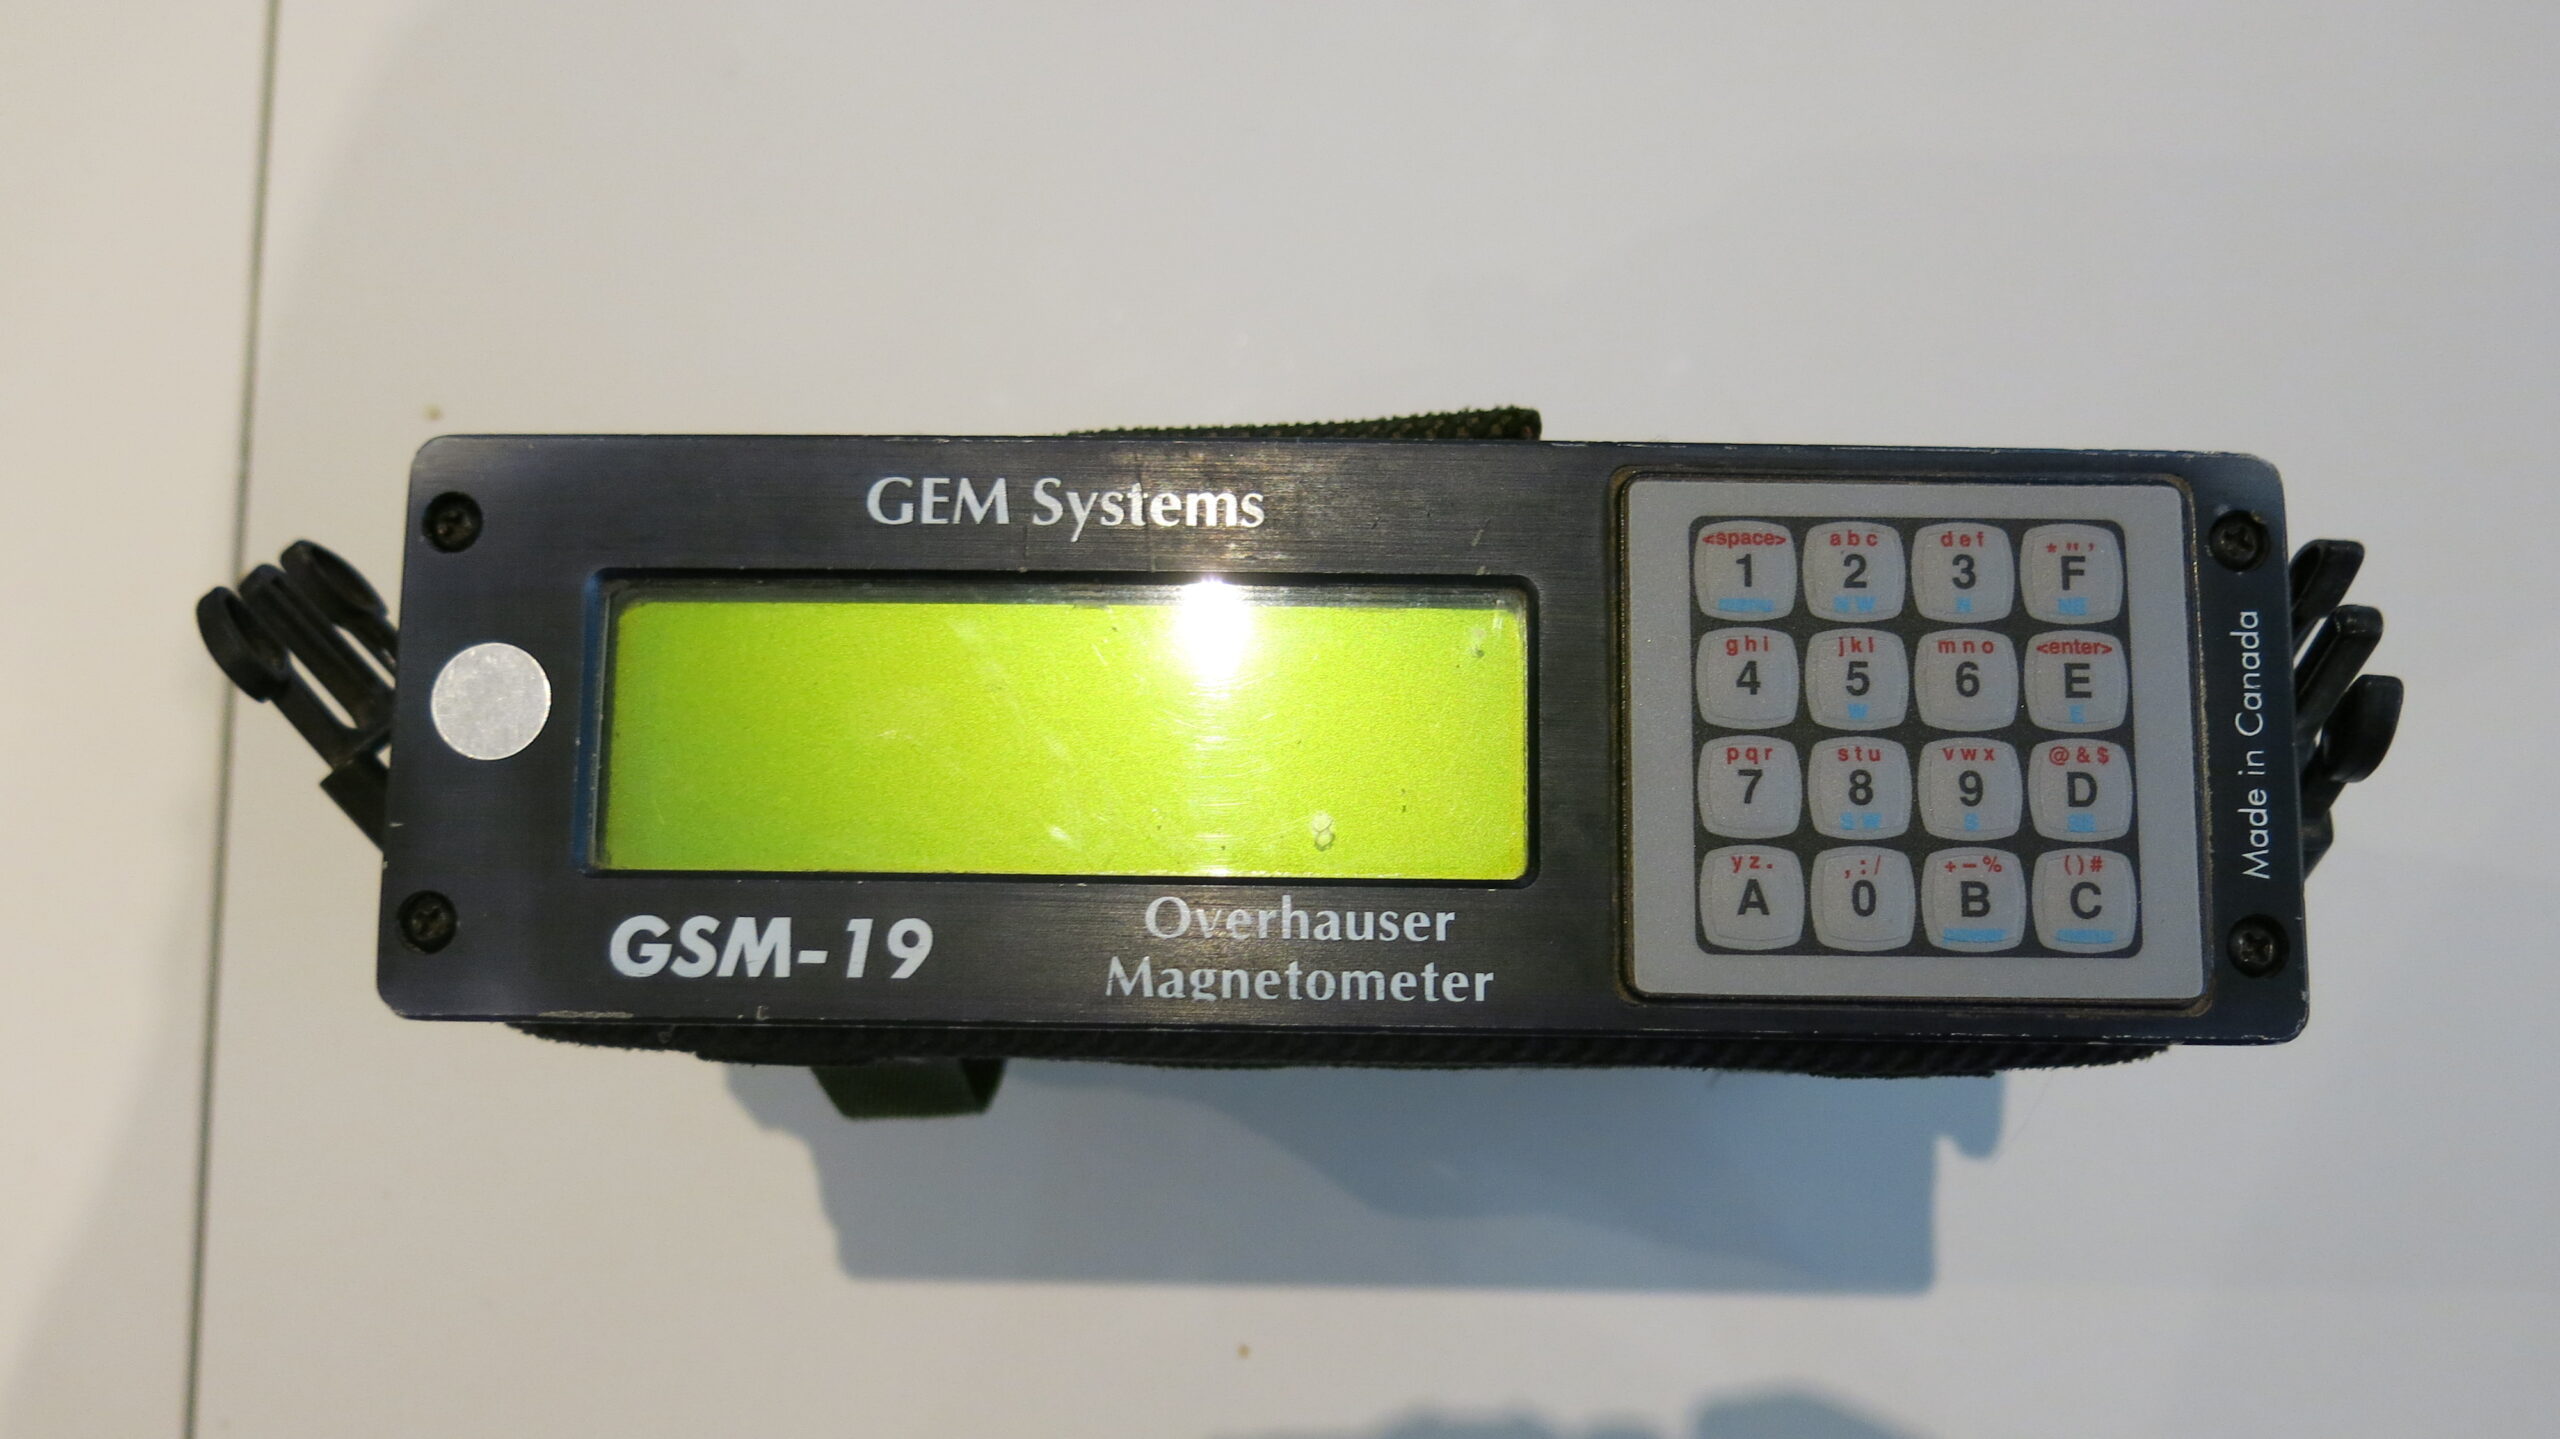 Used GEM Systems GSM19W overhauser magnetometer with GPS for sale (SOLD)